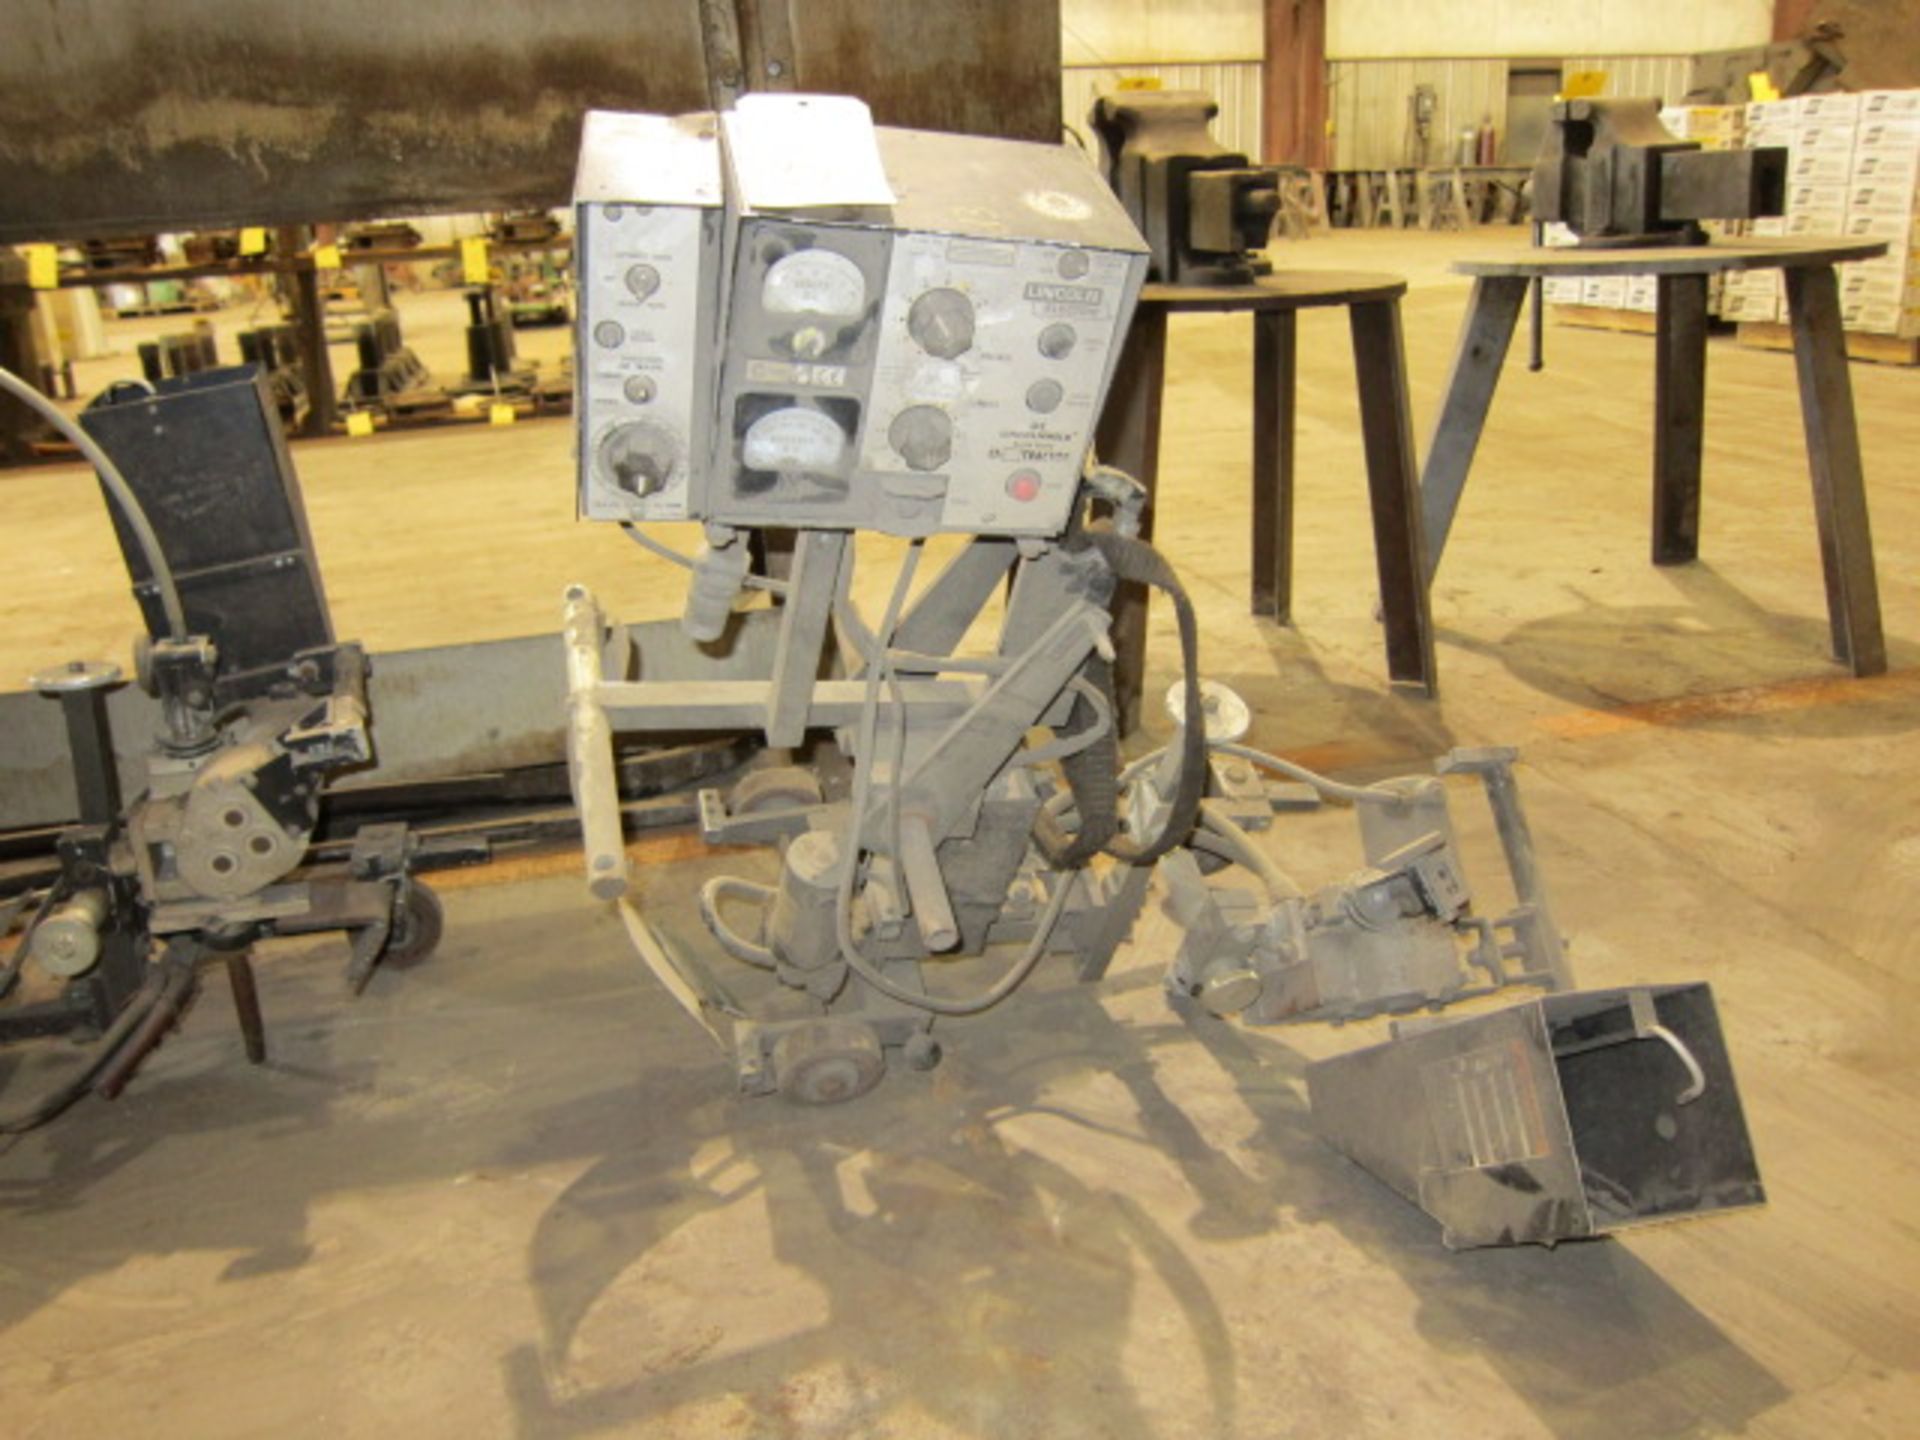 WELDING TRACTOR, LINCOLN MDL. LT7, w/wire feed, flux box & controls